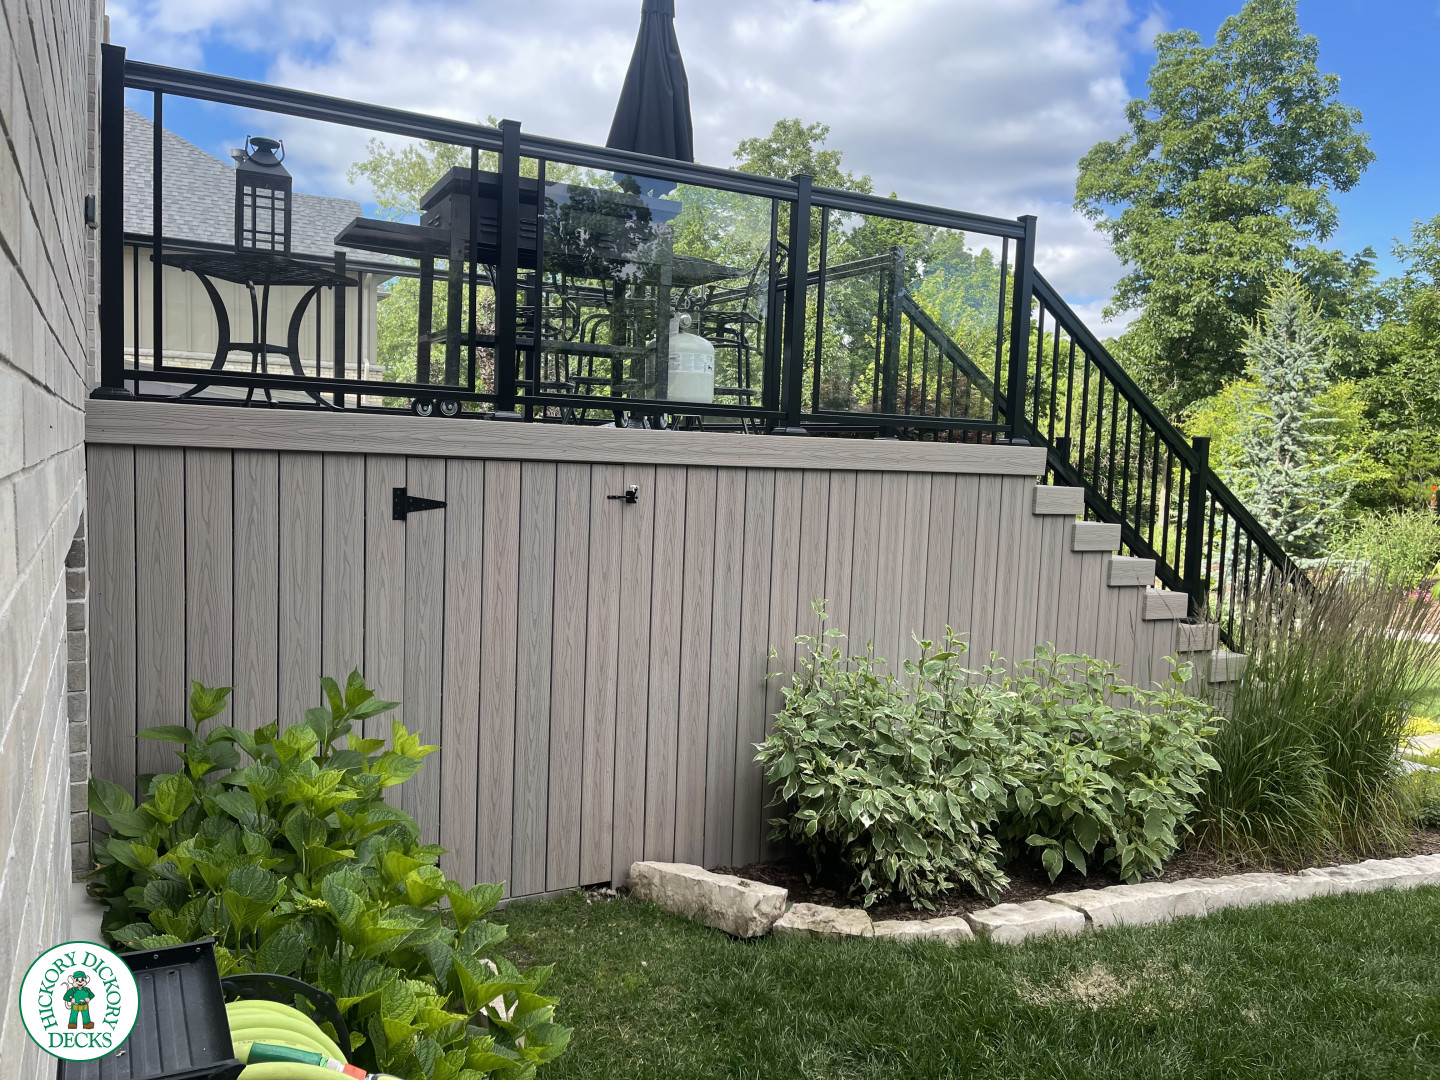 High walk out grey composite deck with aluminum railing on the stairs, and glass style railing around the deck.